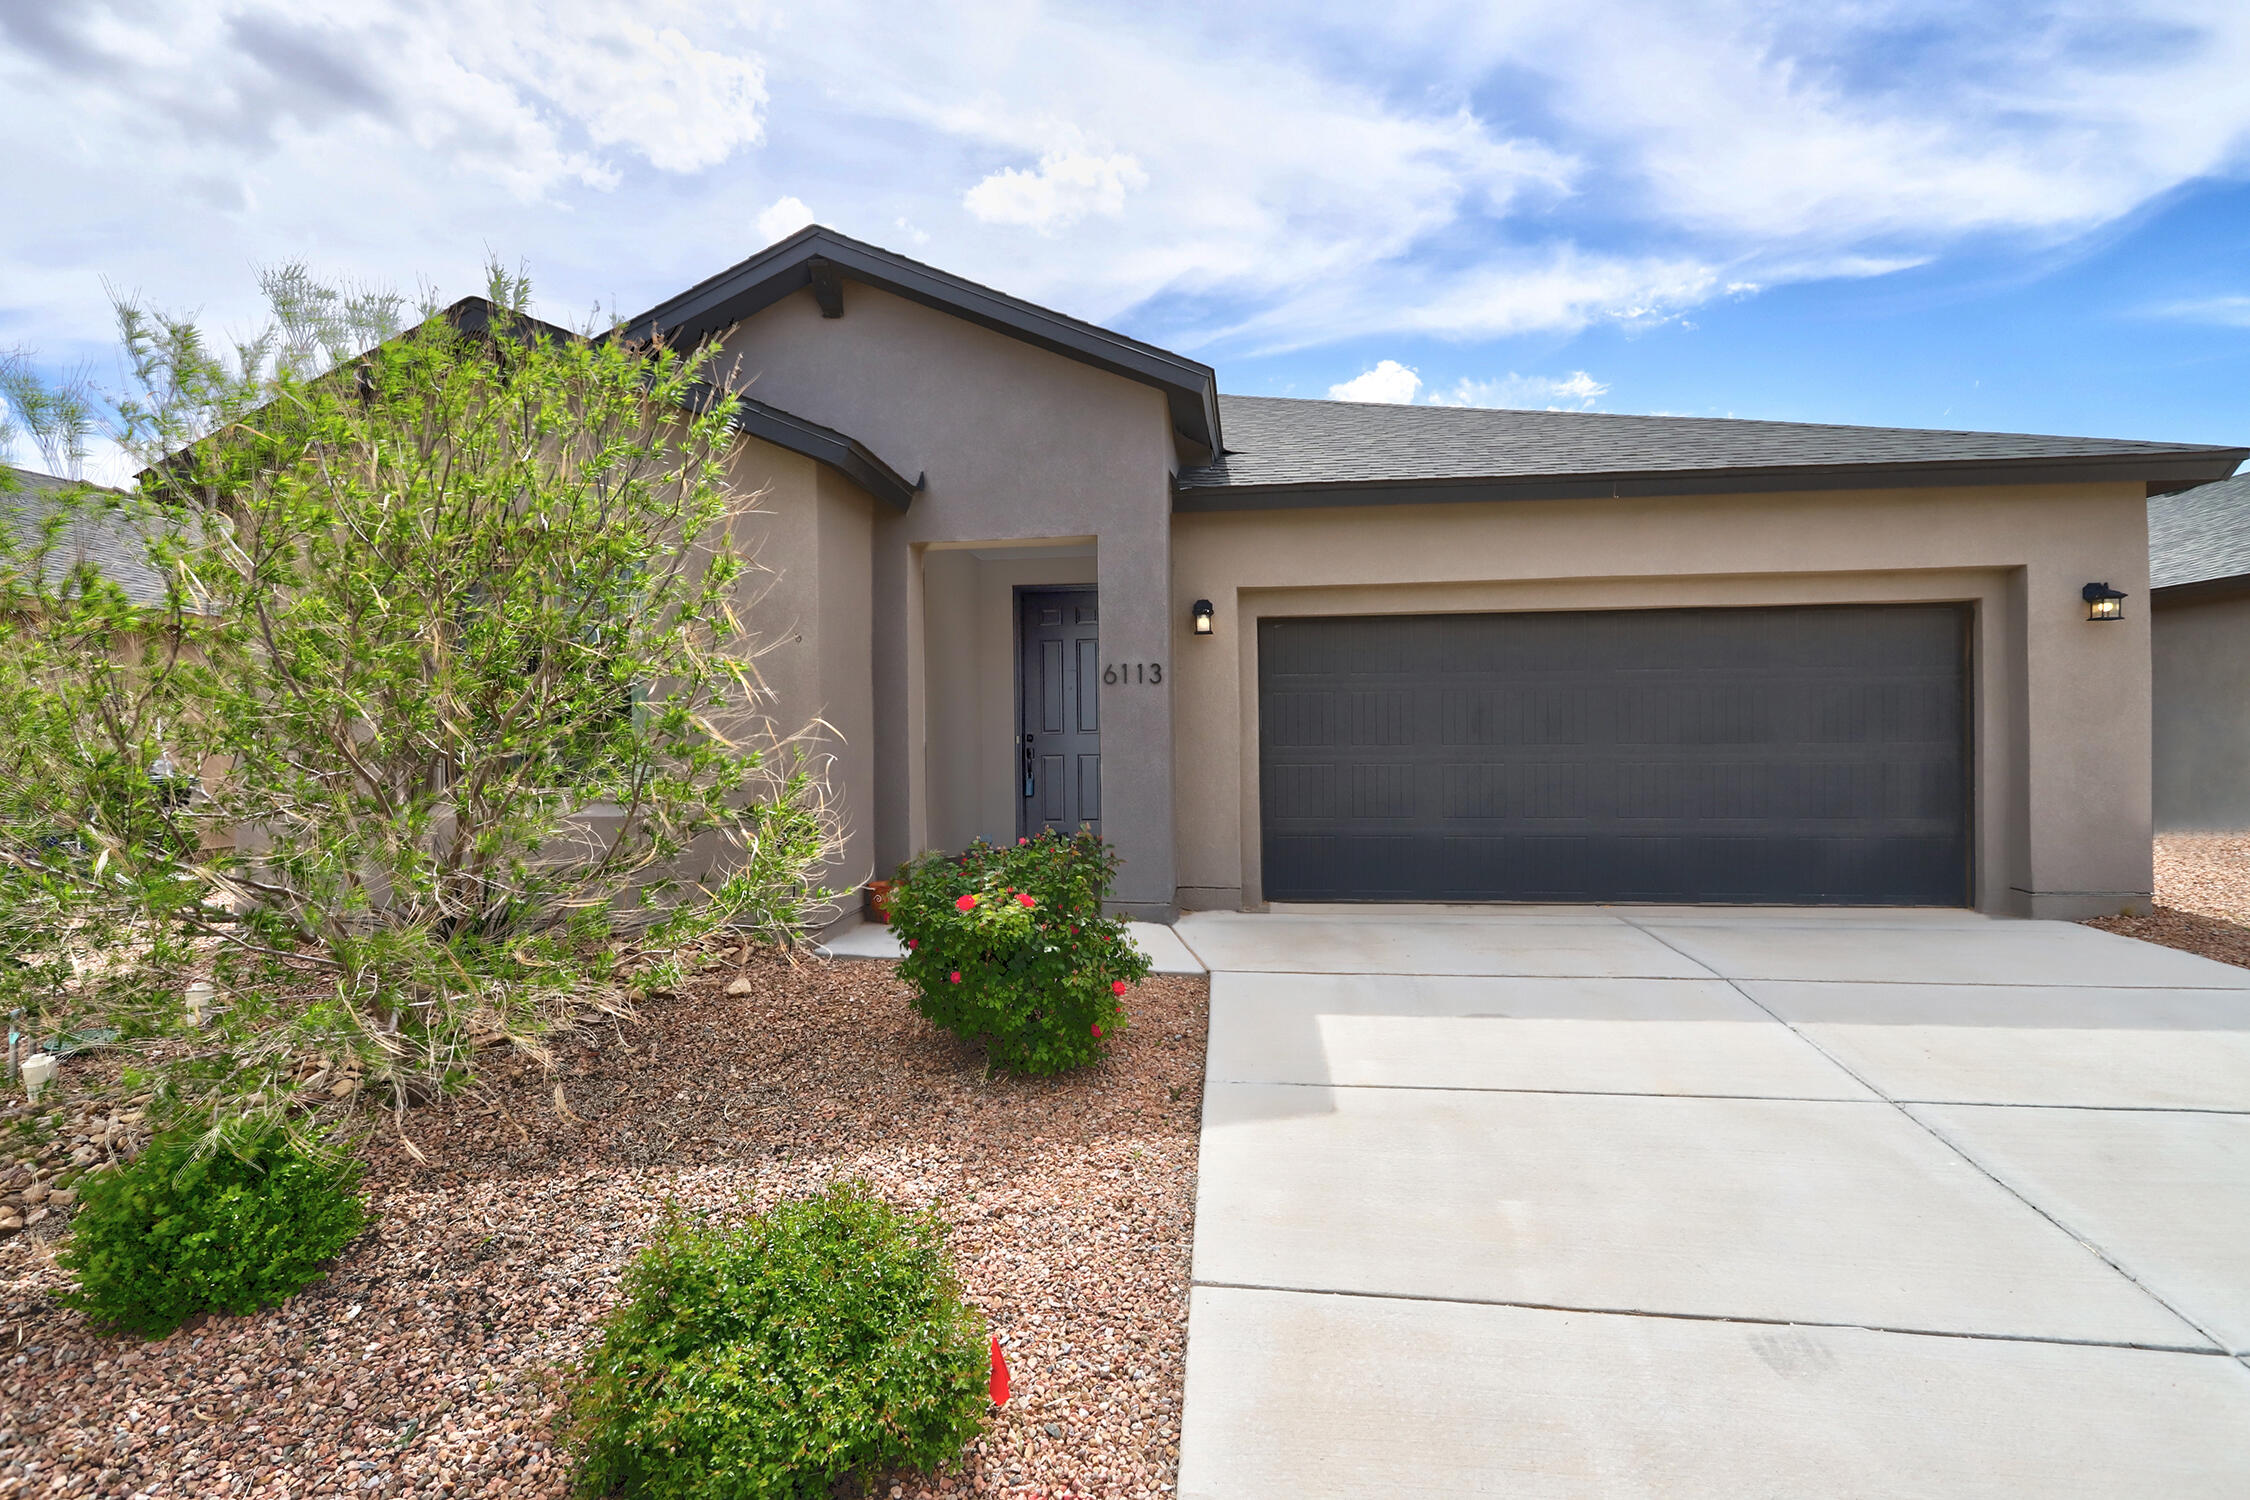 6113 Wyeth Drive SE, Albuquerque, New Mexico 87106, 3 Bedrooms Bedrooms, ,2 BathroomsBathrooms,Residential,For Sale,6113 Wyeth Drive SE,1062240